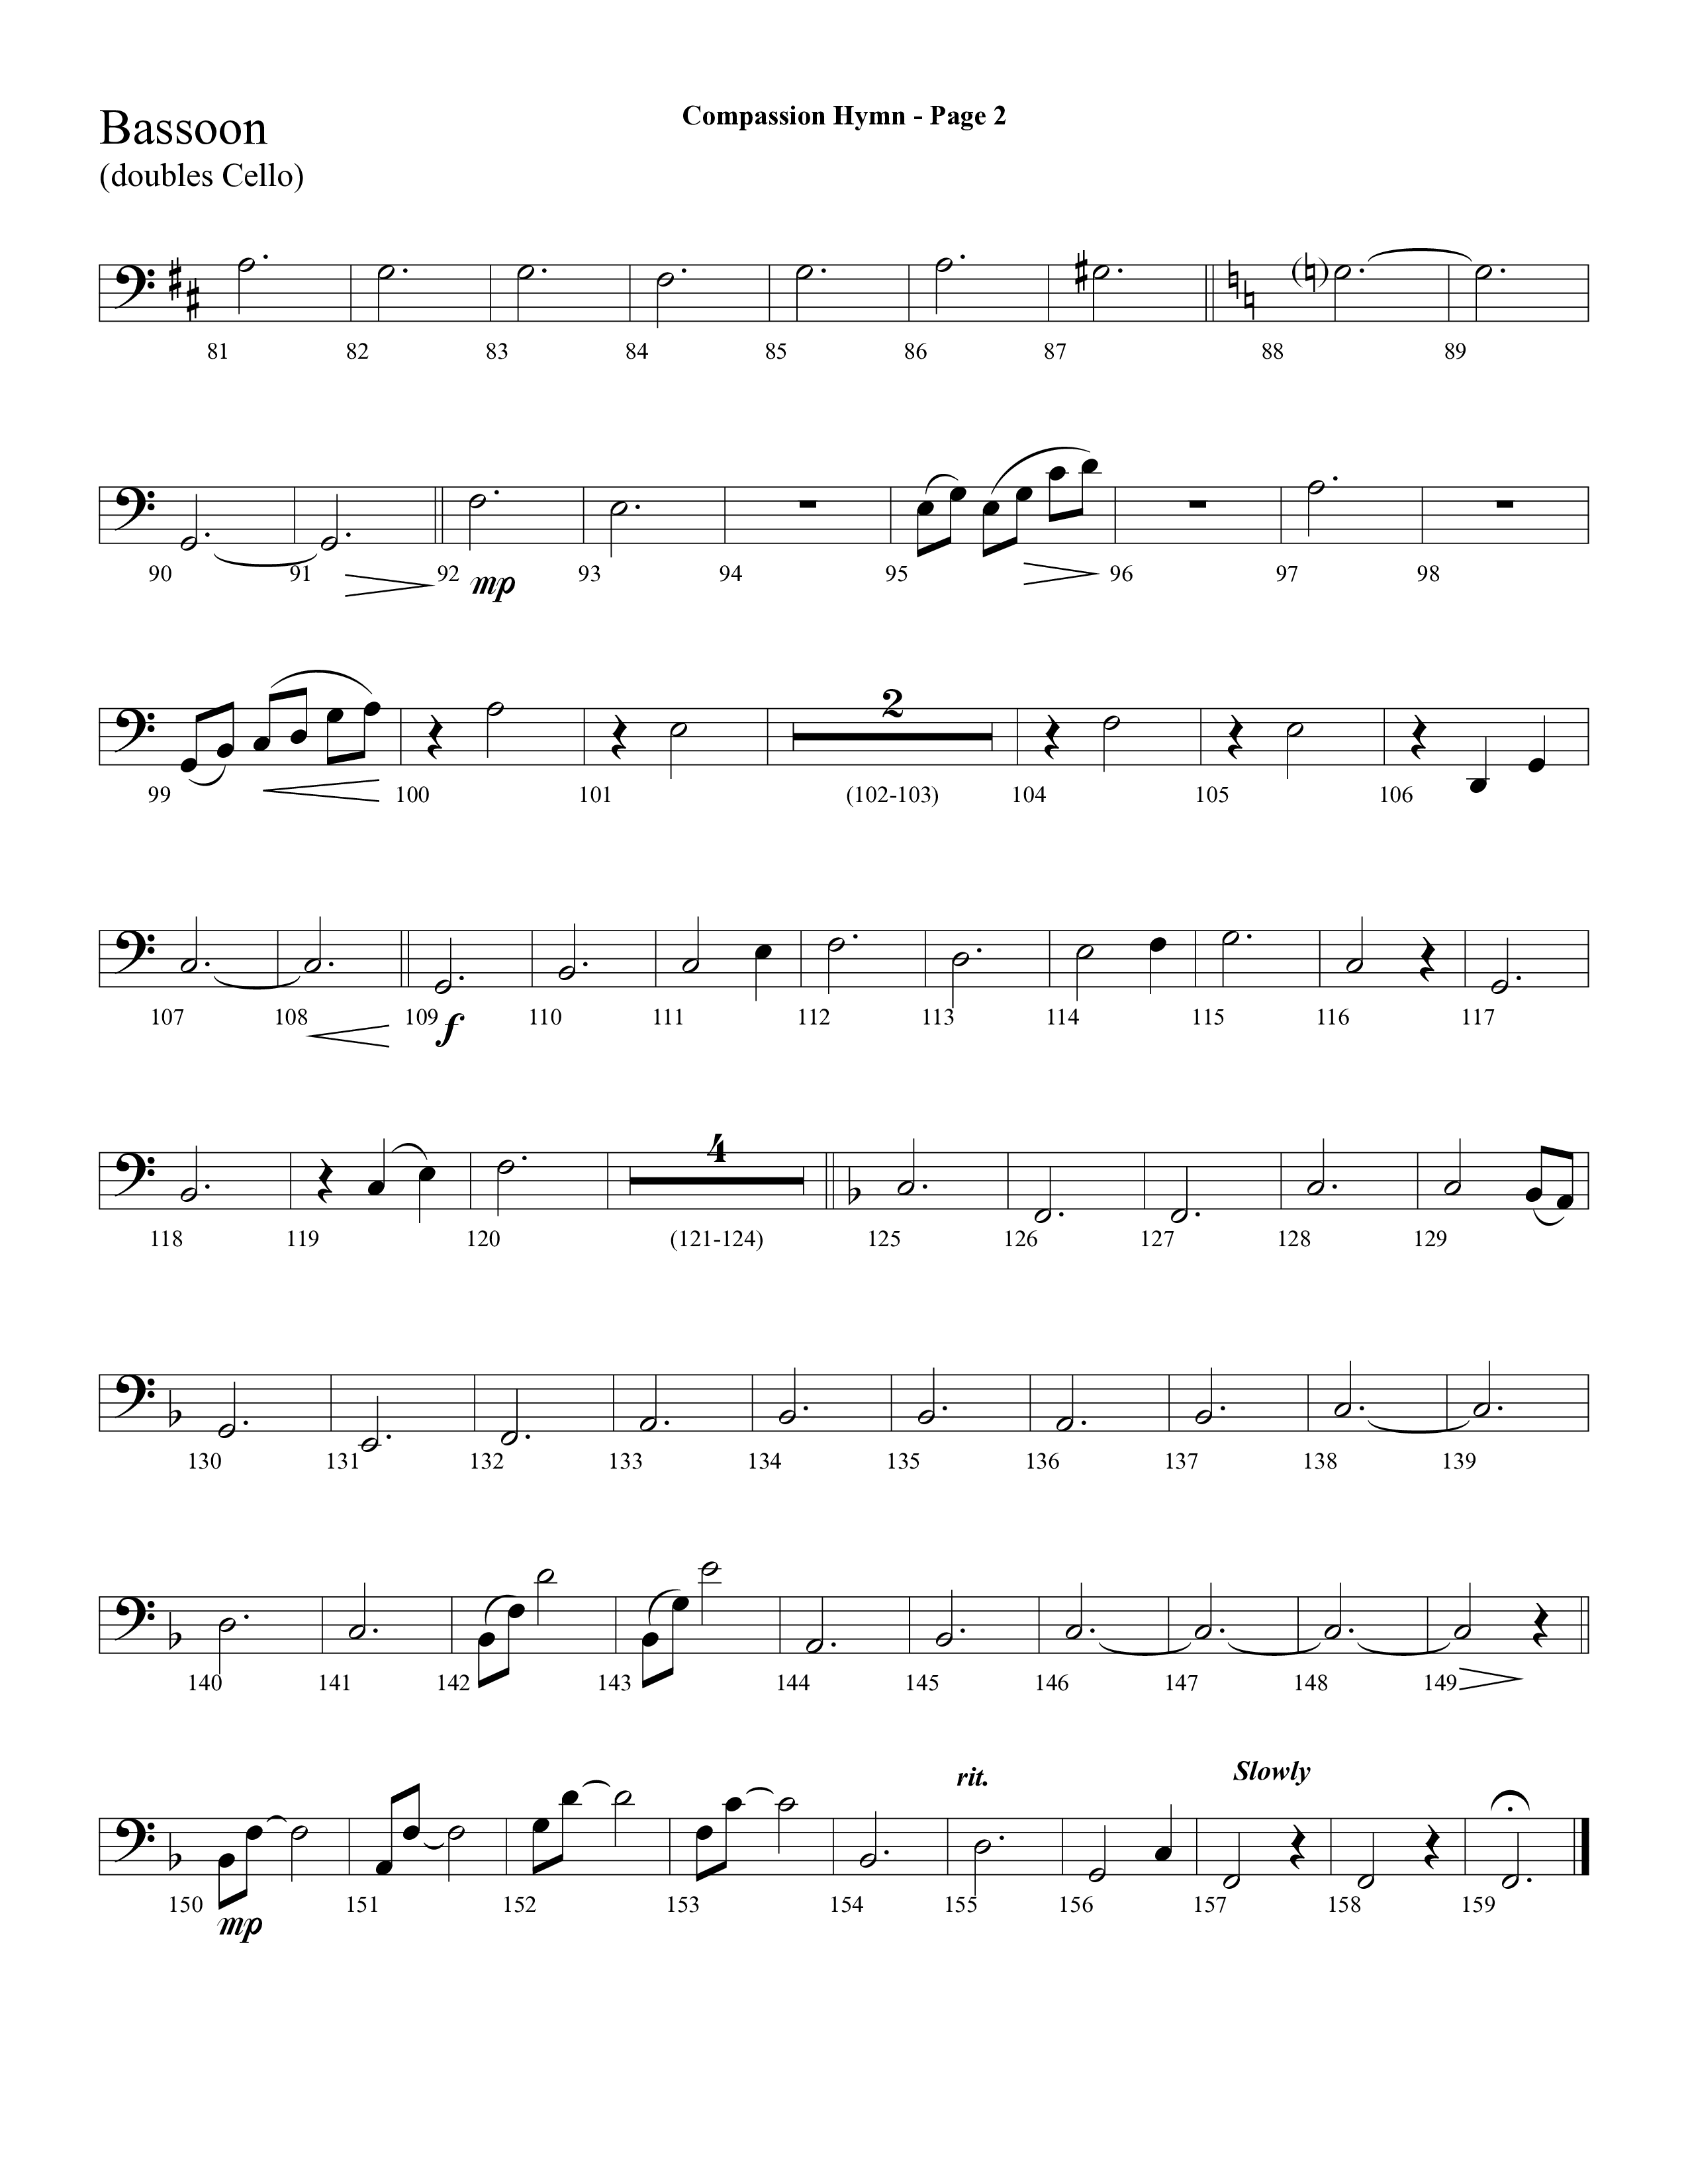 Compassion Hymn (with And Can It Be) (Choral Anthem SATB) Bassoon (Lifeway Choral / Arr. Dave Williamson)